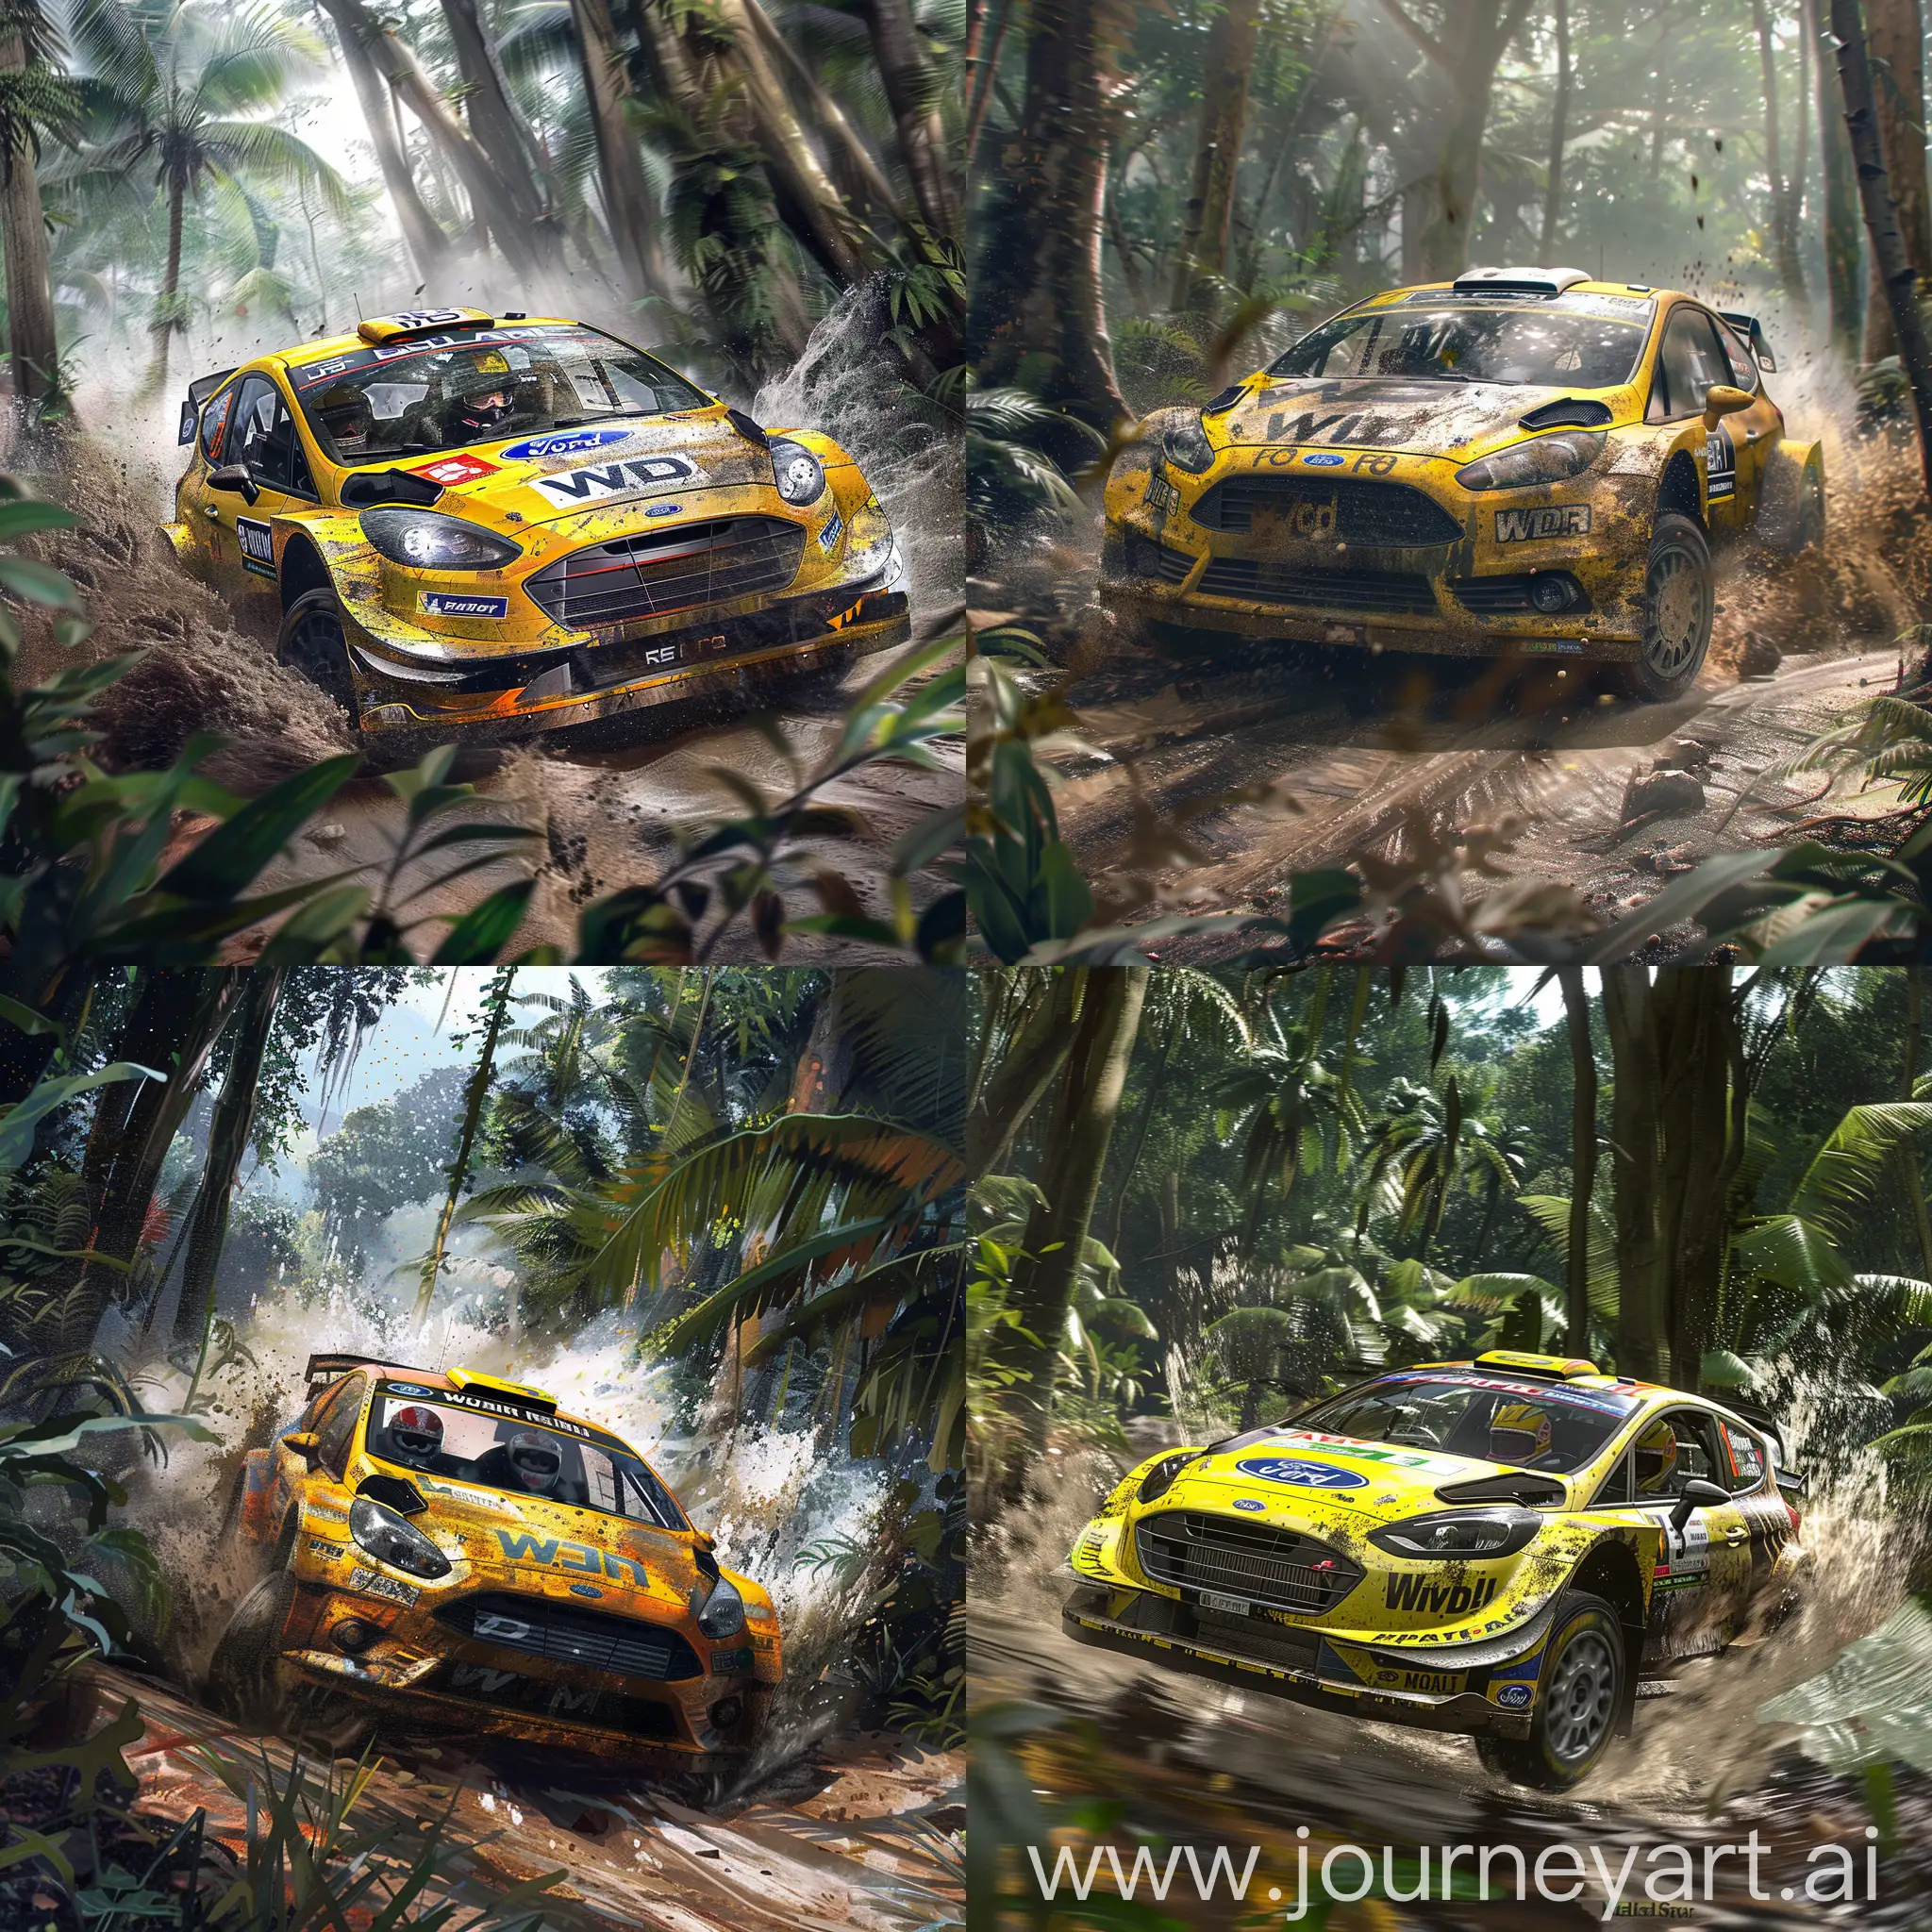 Ford-Fiesta-R5-WD40-Livery-Rally-Crash-in-Jungle